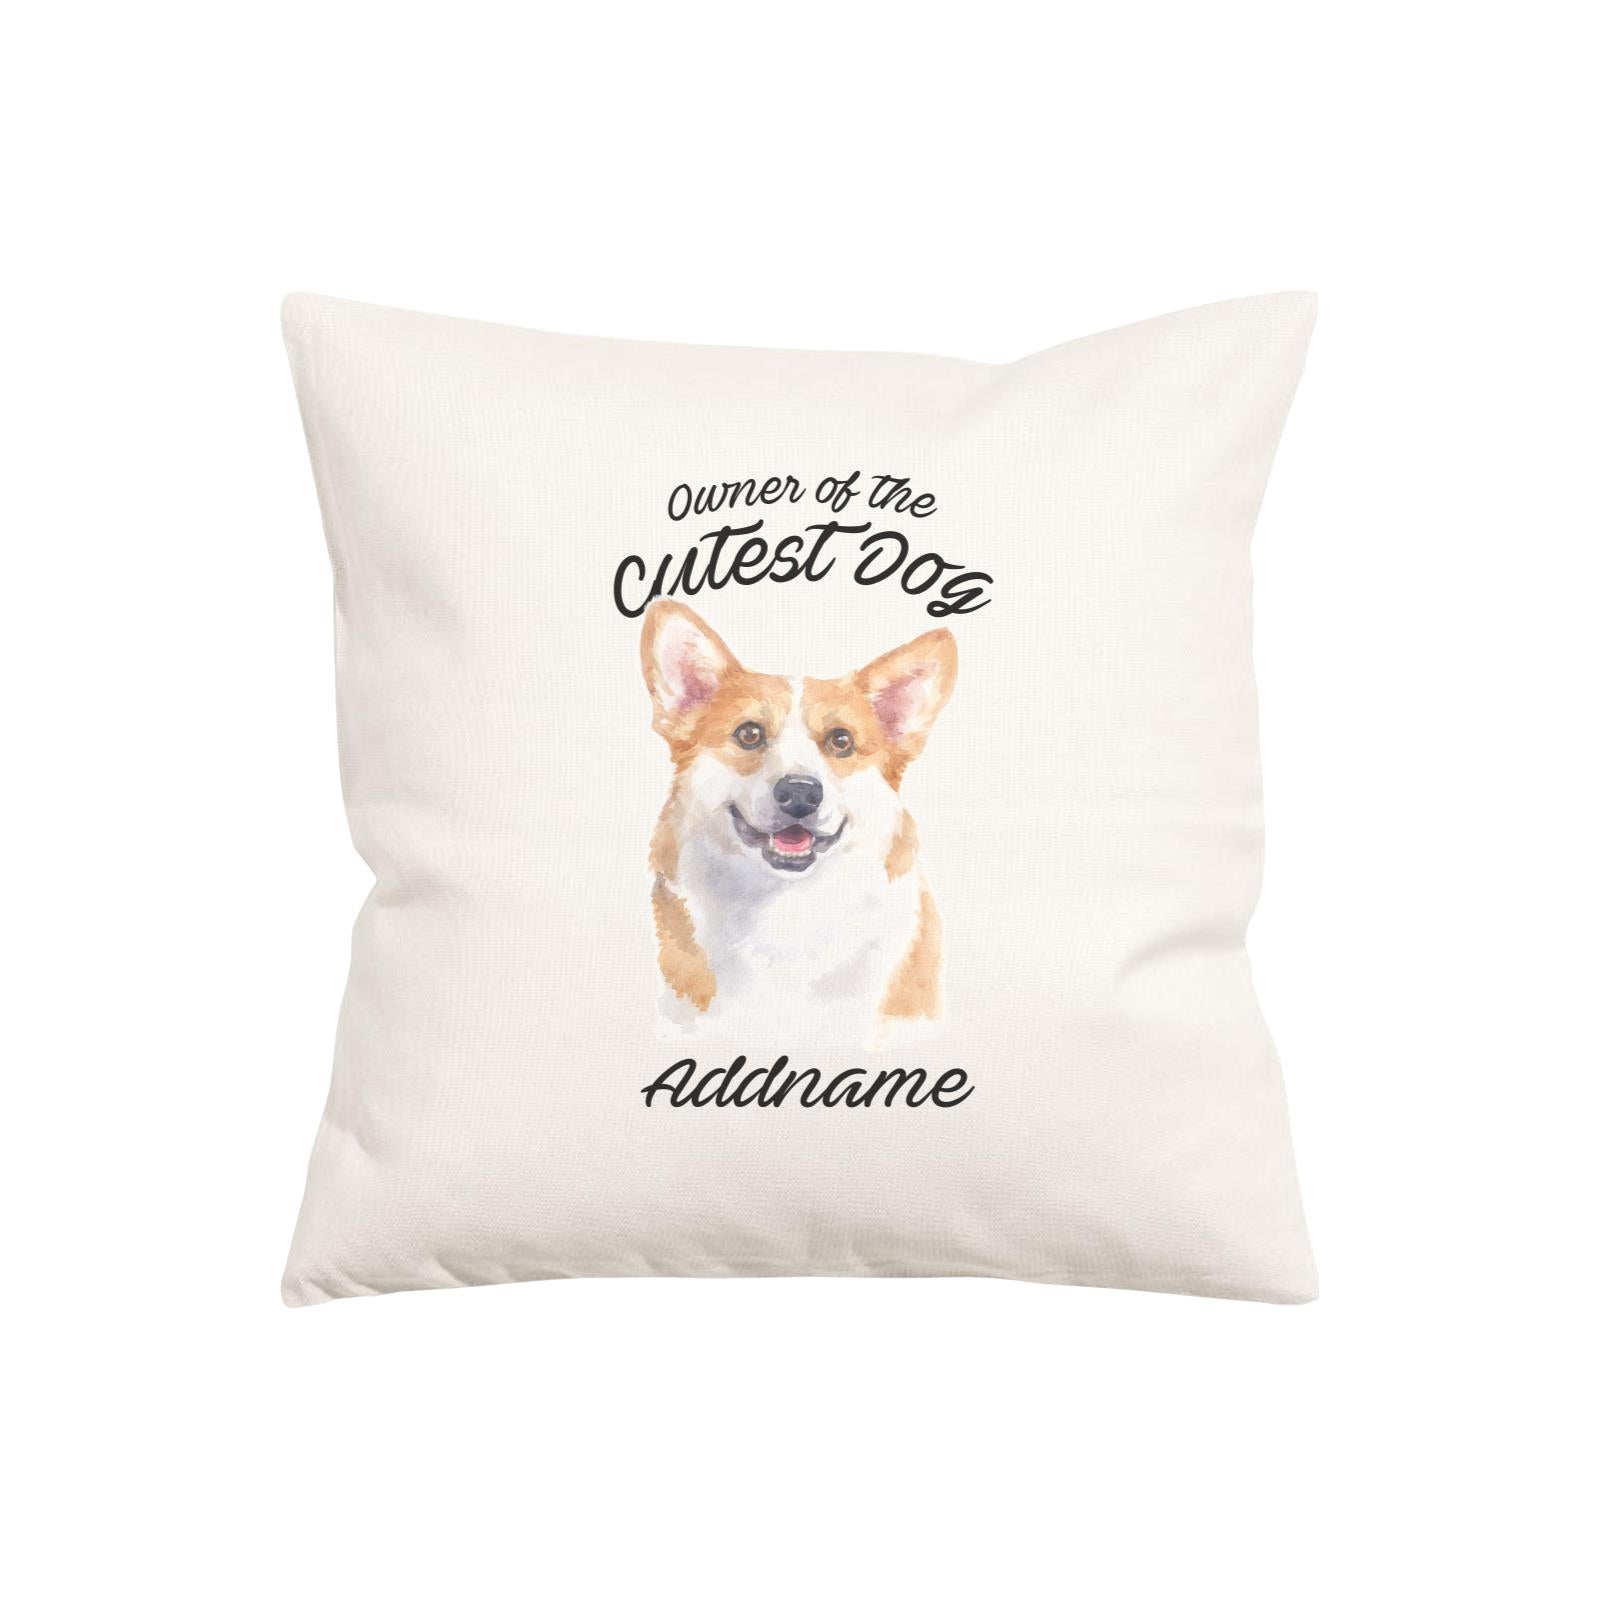 Watercolor Dog Owner Of The Cutest Dog Welsh Corgi Smile Addname Pillow Cushion